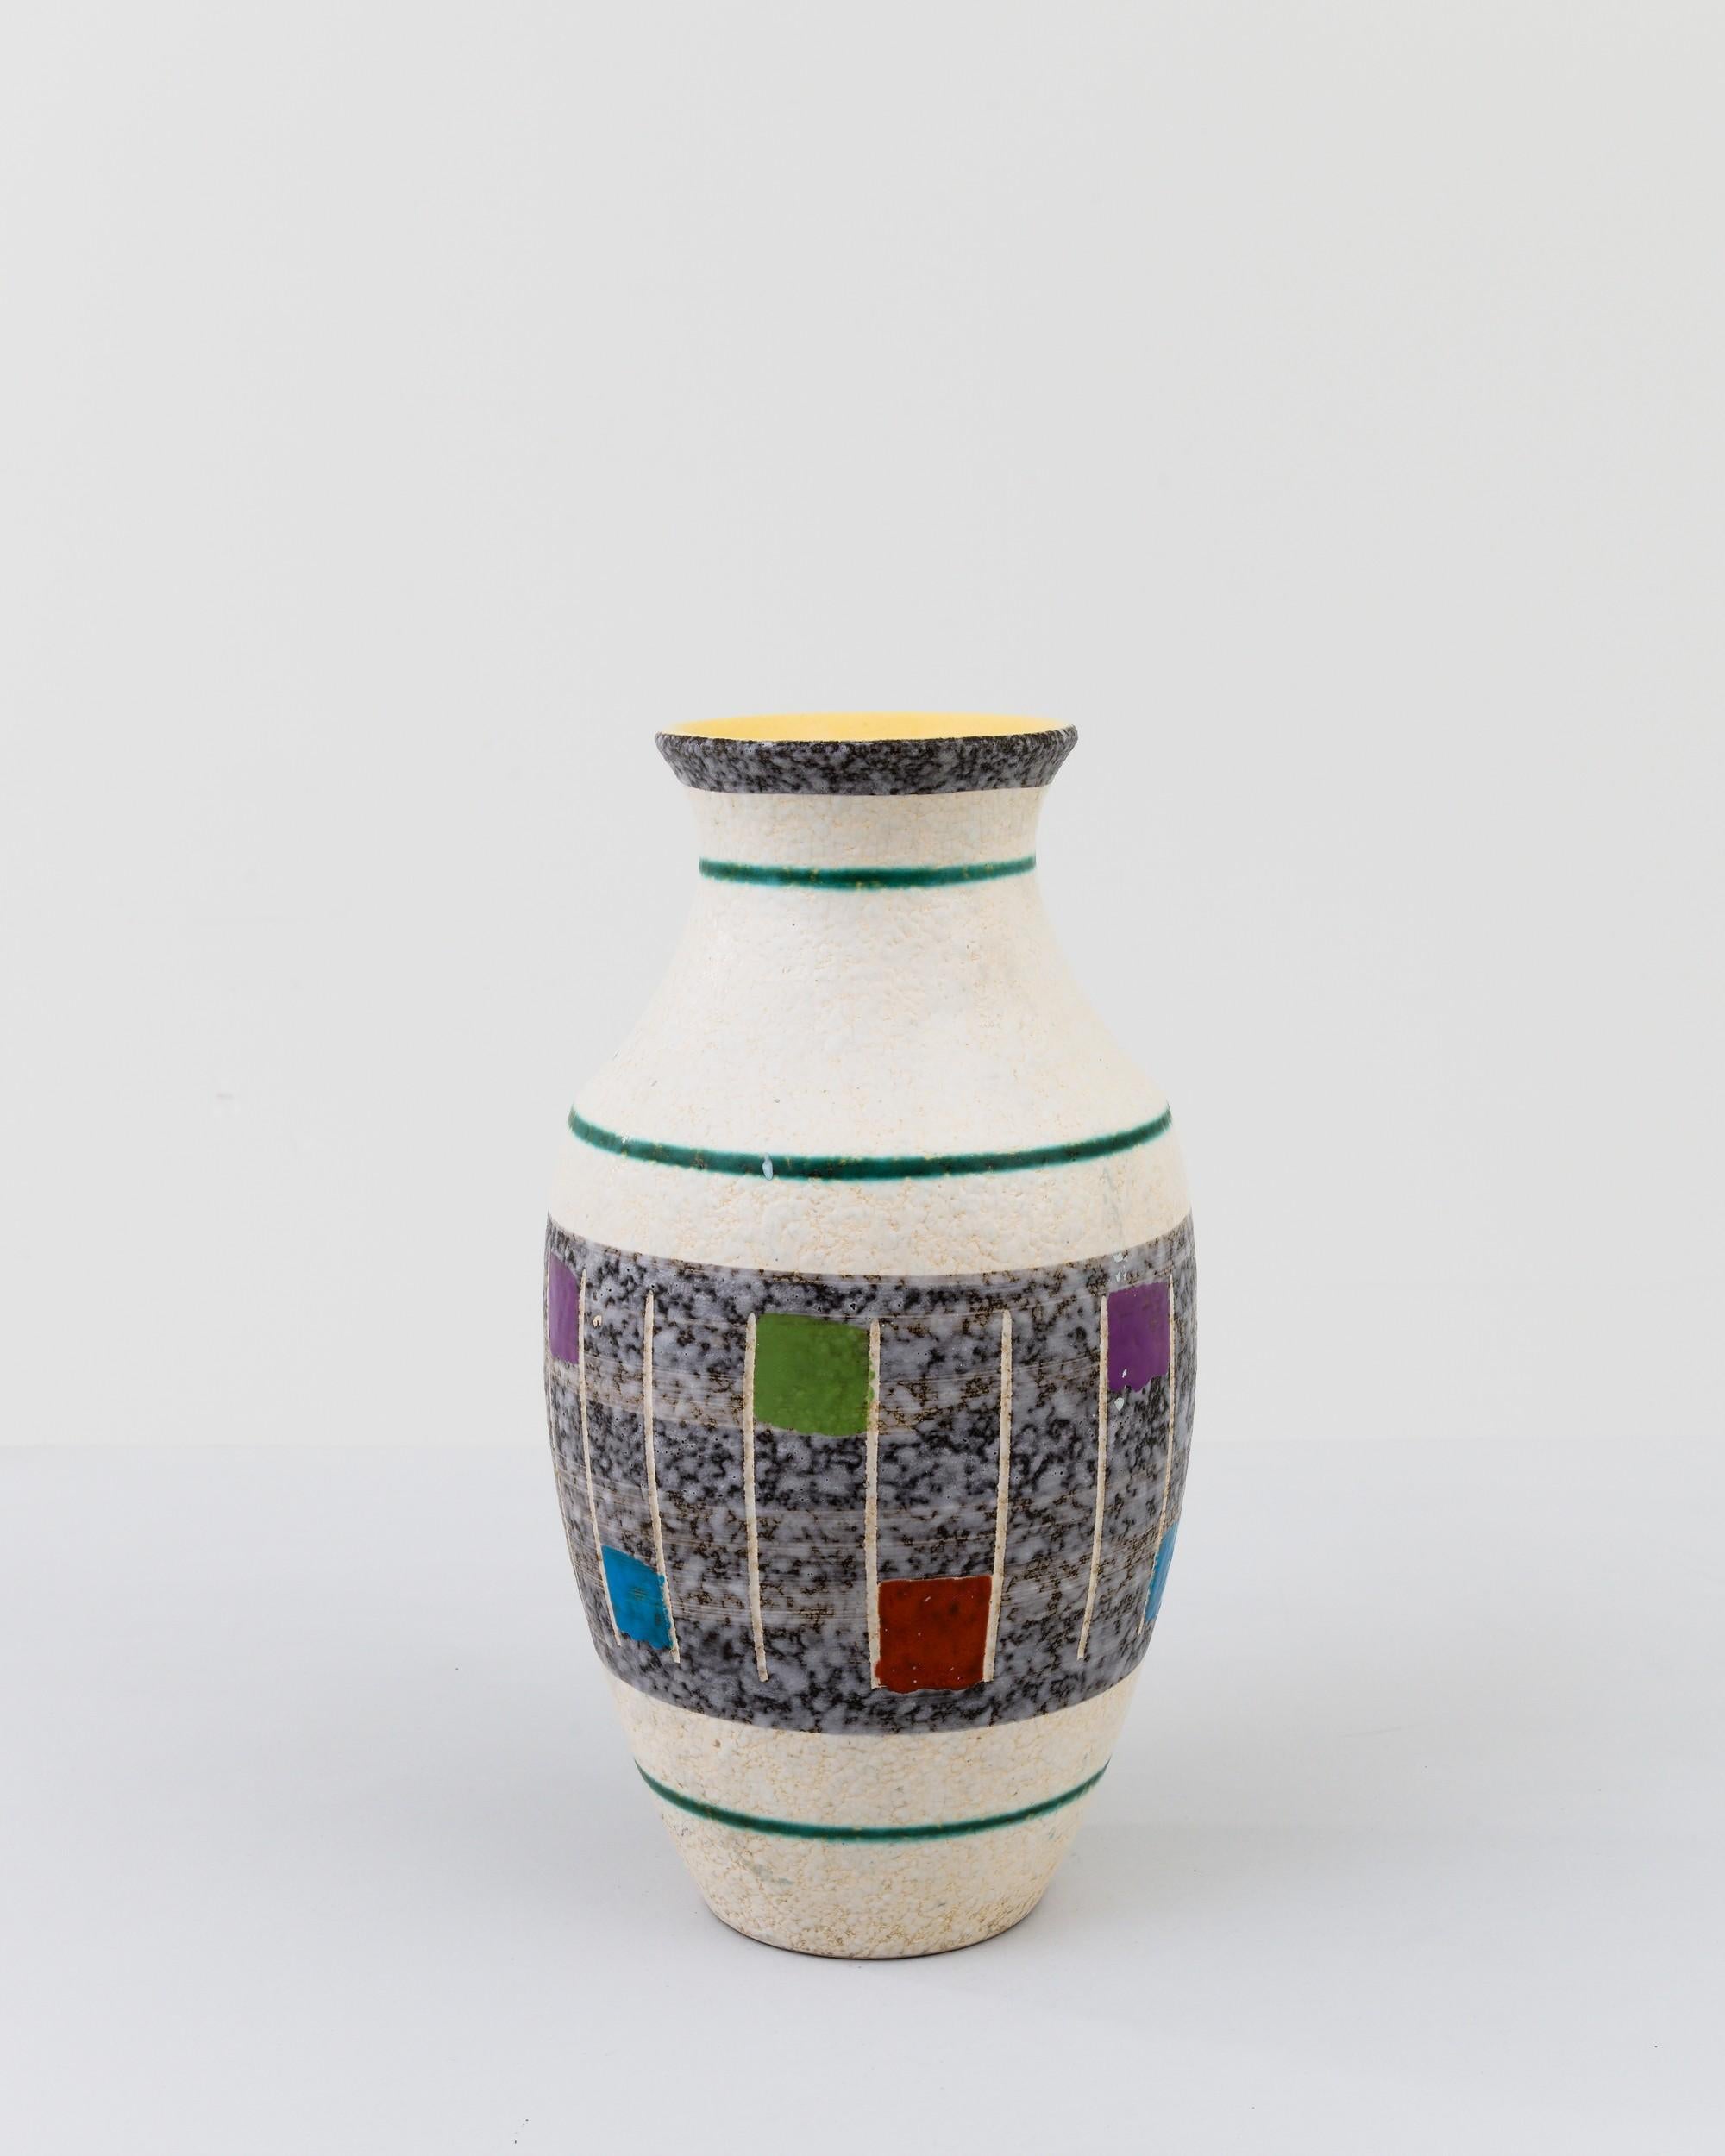 A ceramic vase from mid-20th century Germany. Neither large nor small, this studio made pot reflects the hand-held, and the handmade; the tactility of process and the artist's vision– realized on the potter’s wheel. Thickly glazed with graphic pops